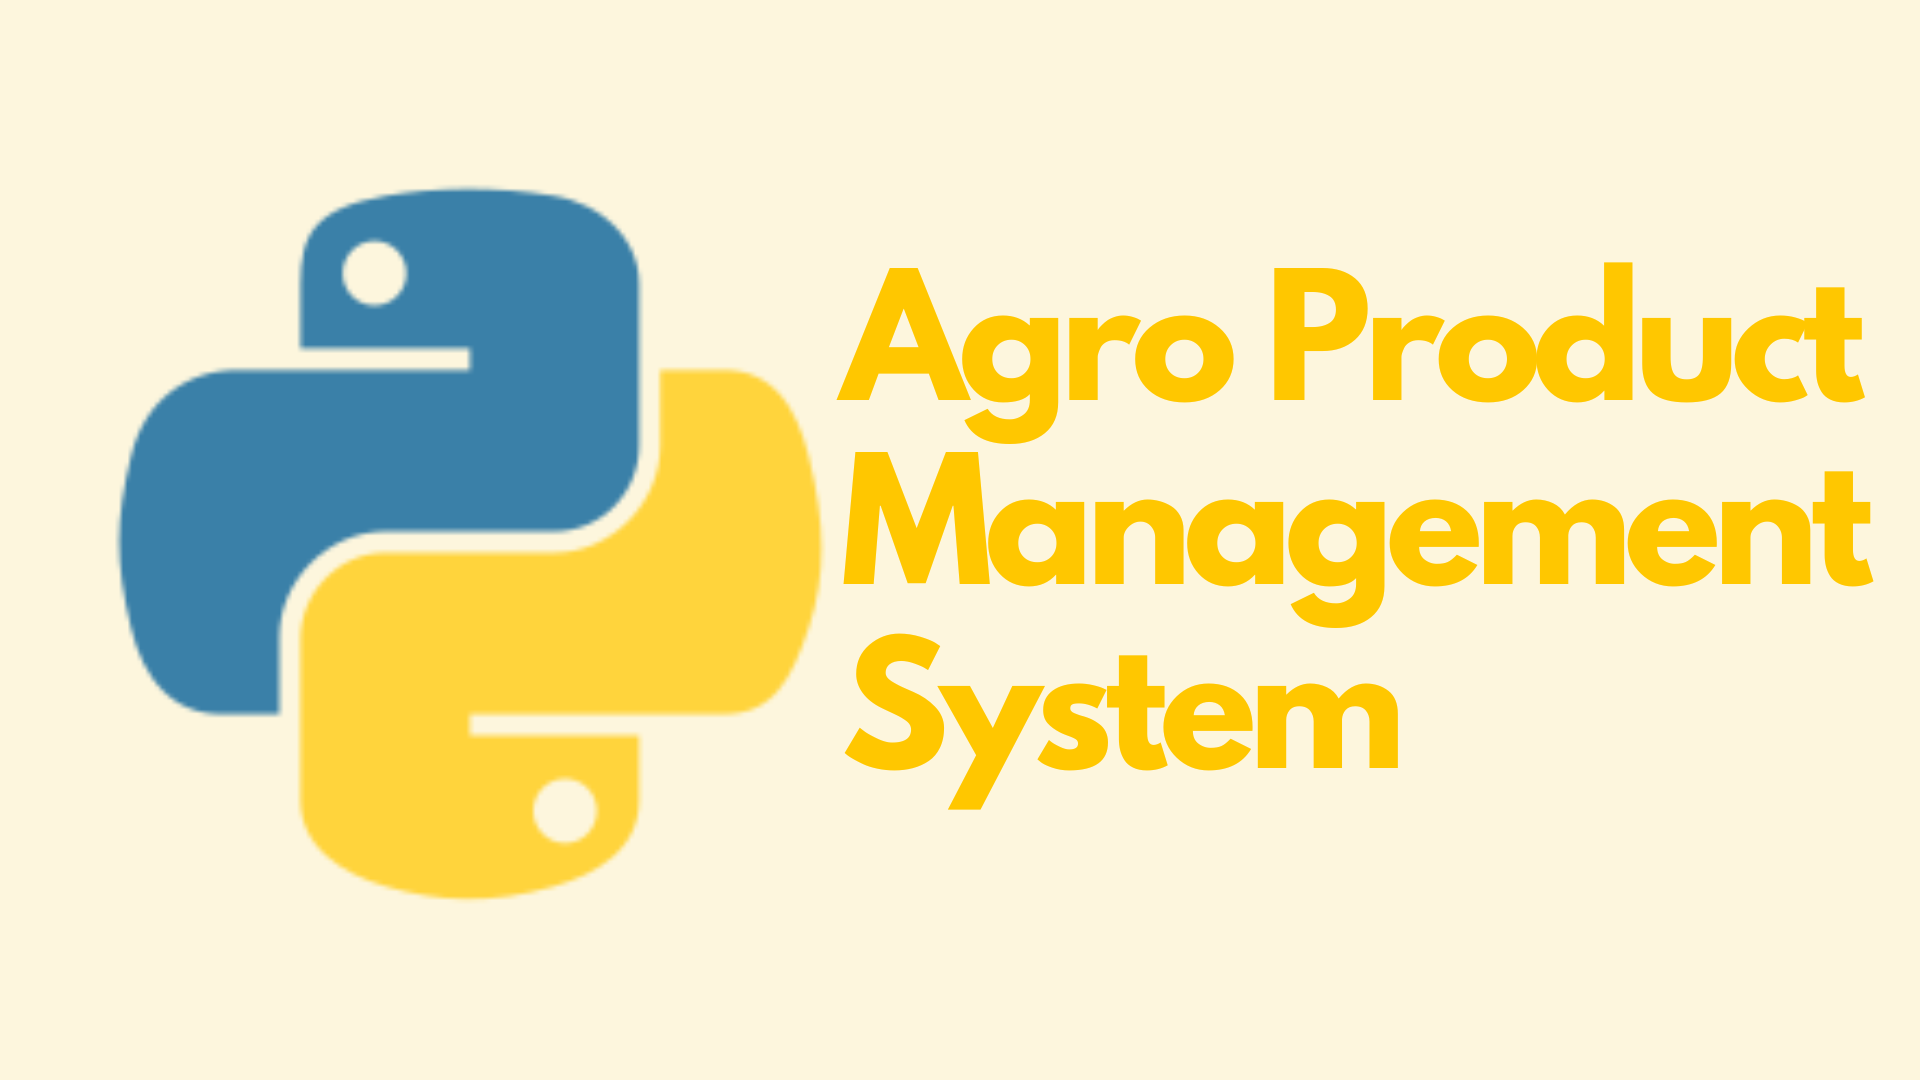 Agro Product Management System